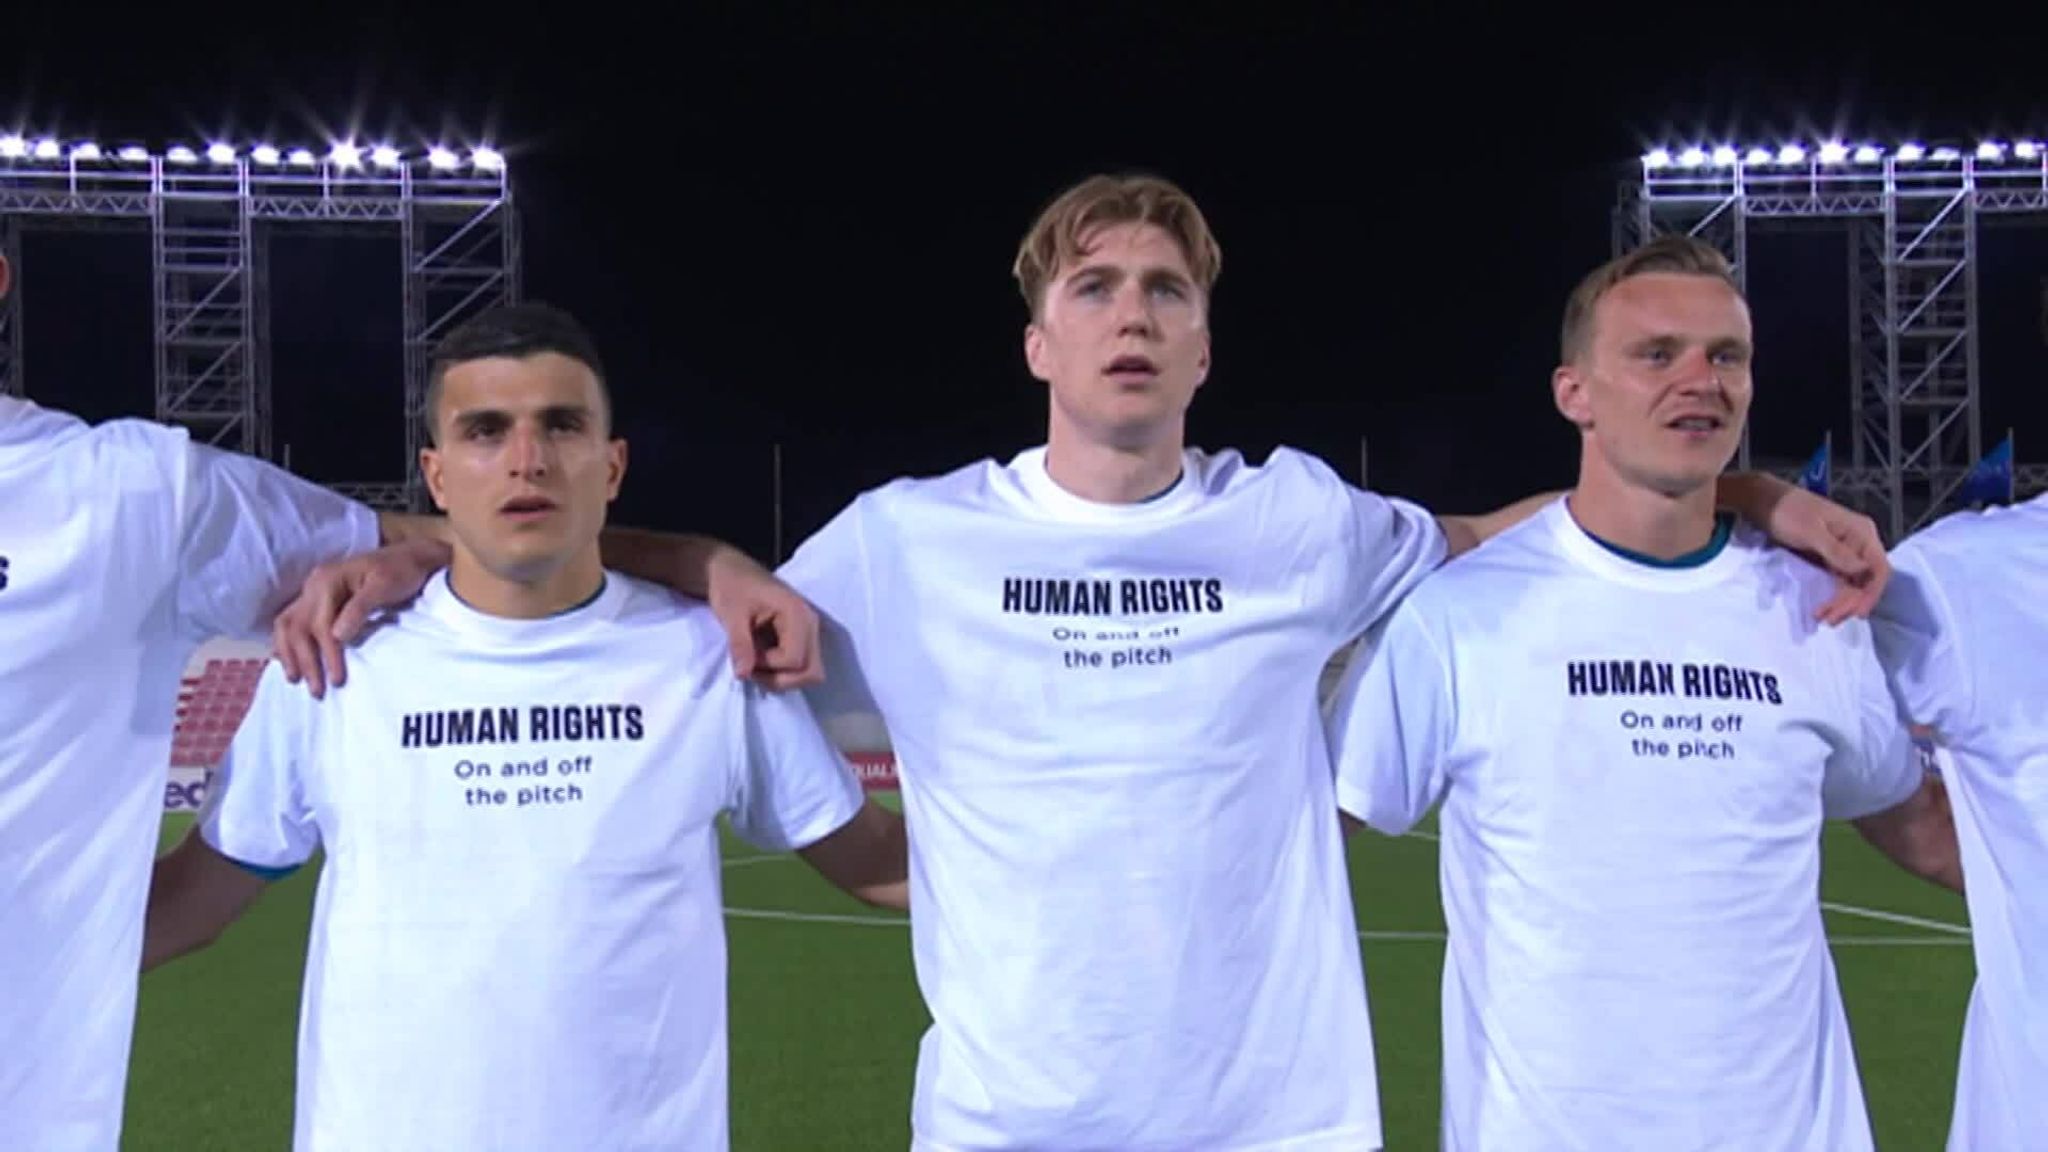 Qatar 2022 World Cup: Norway players protest to express concerns over